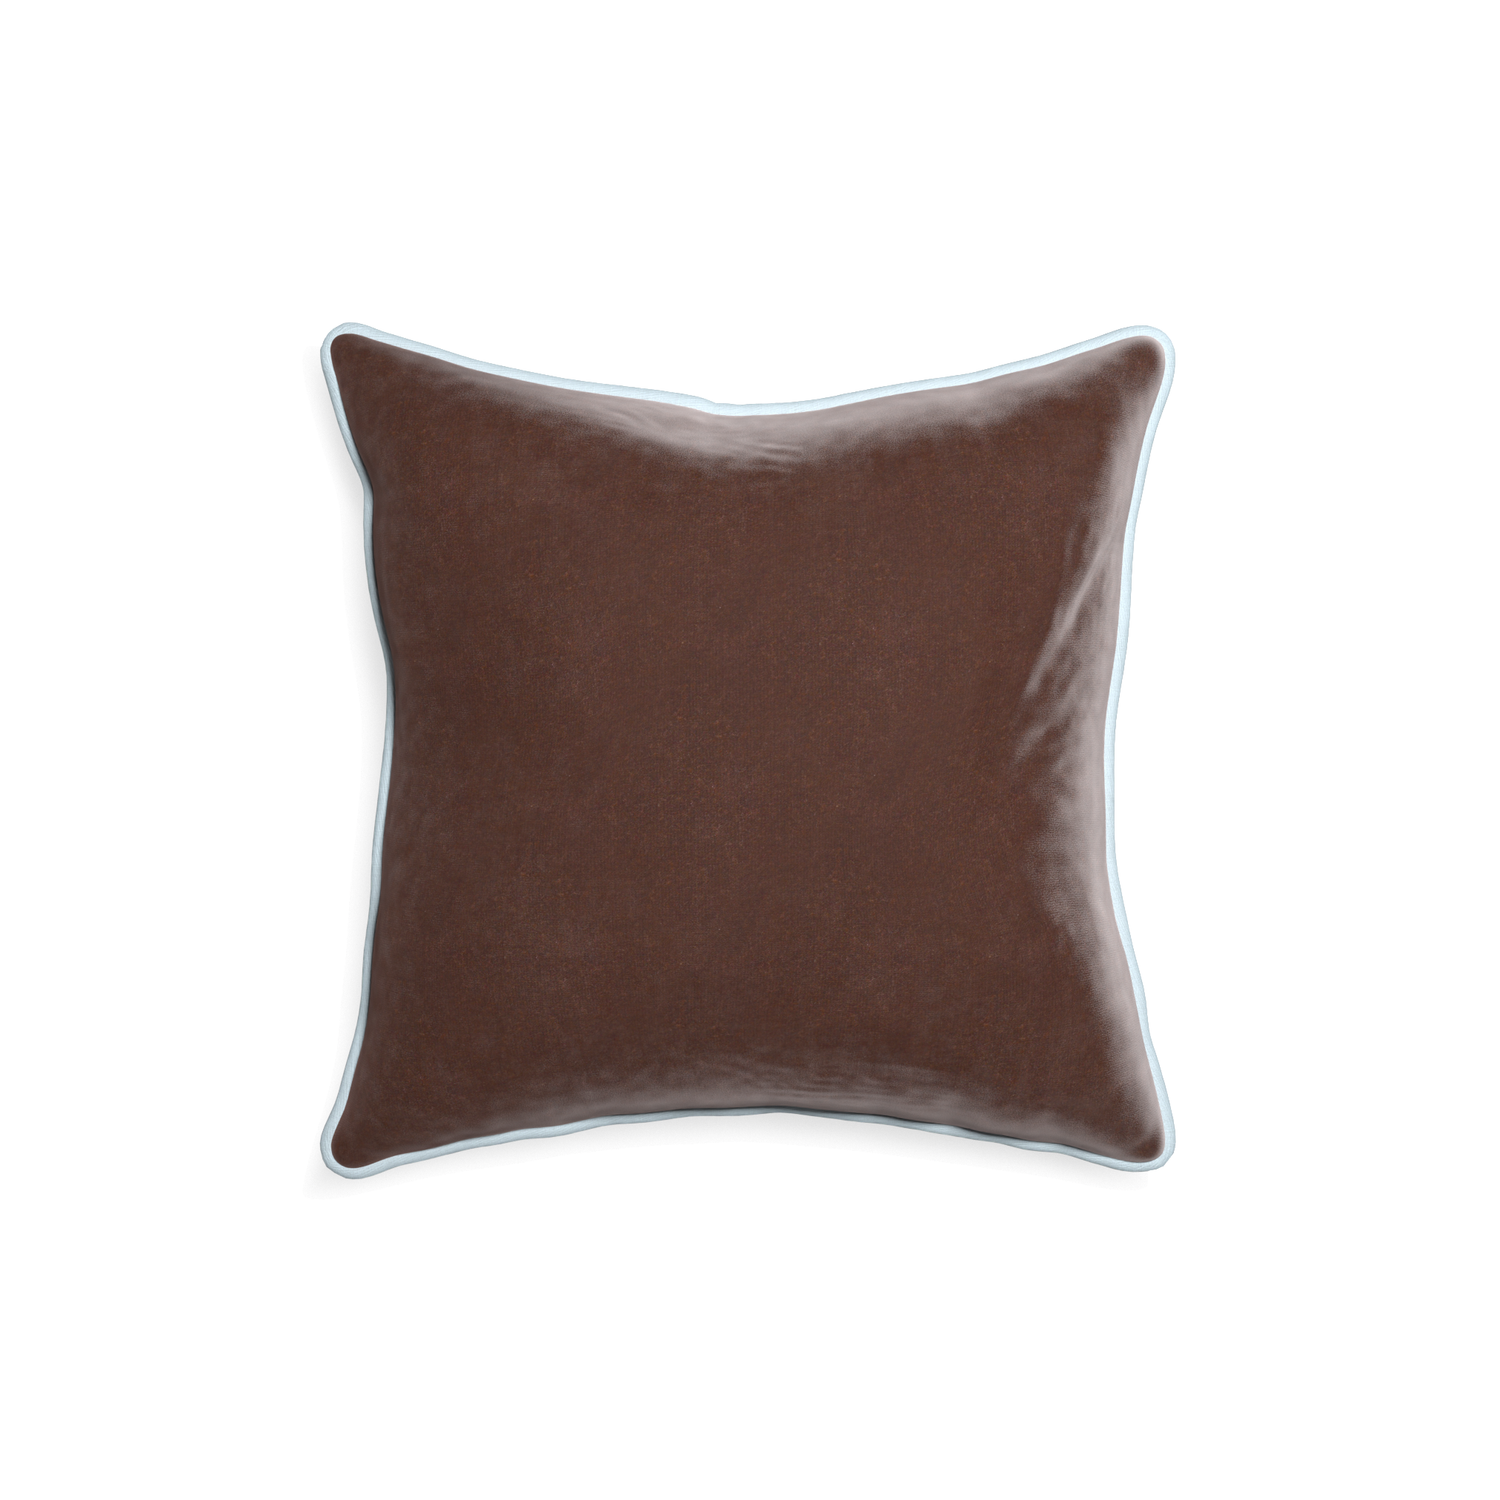 18-square walnut velvet custom pillow with powder piping on white background